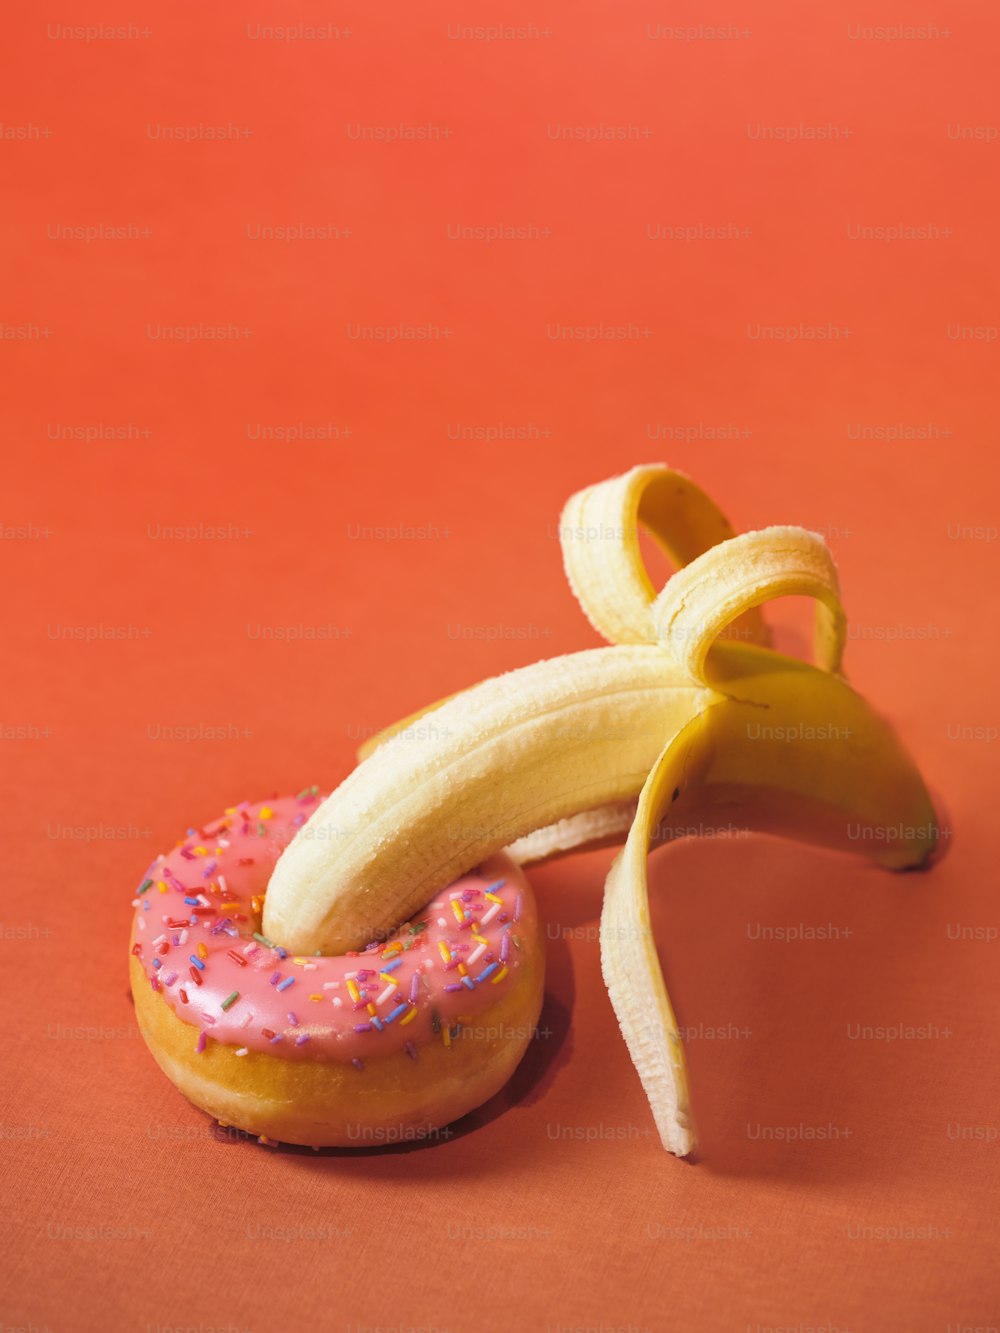 a banana and a donut with sprinkles on a red background